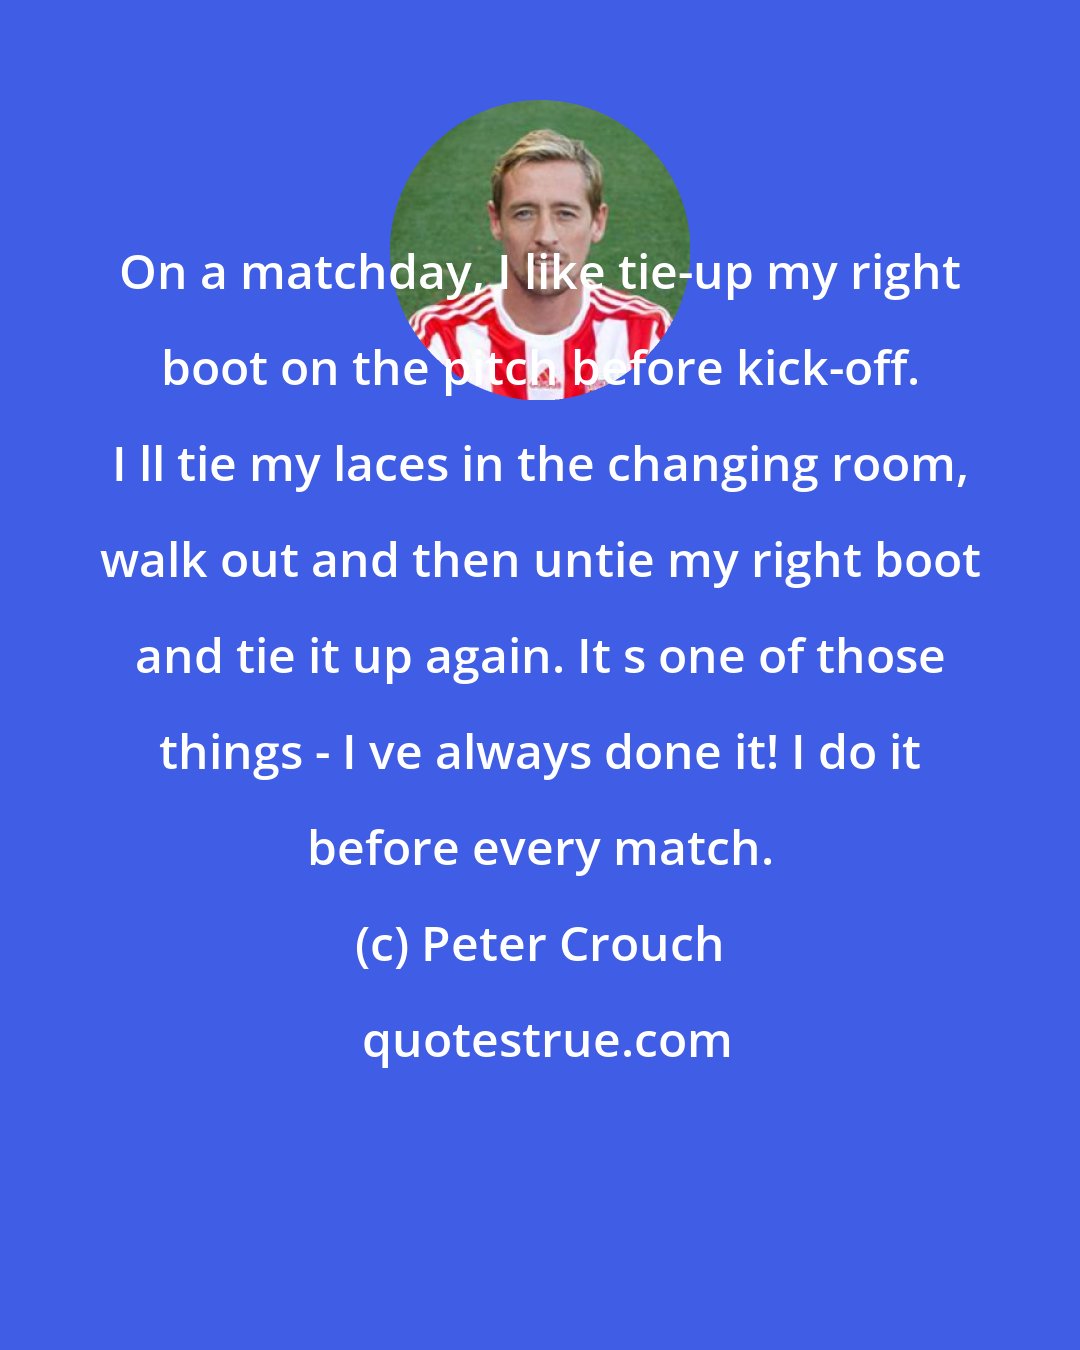 Peter Crouch: On a matchday, I like tie-up my right boot on the pitch before kick-off. I ll tie my laces in the changing room, walk out and then untie my right boot and tie it up again. It s one of those things - I ve always done it! I do it before every match.